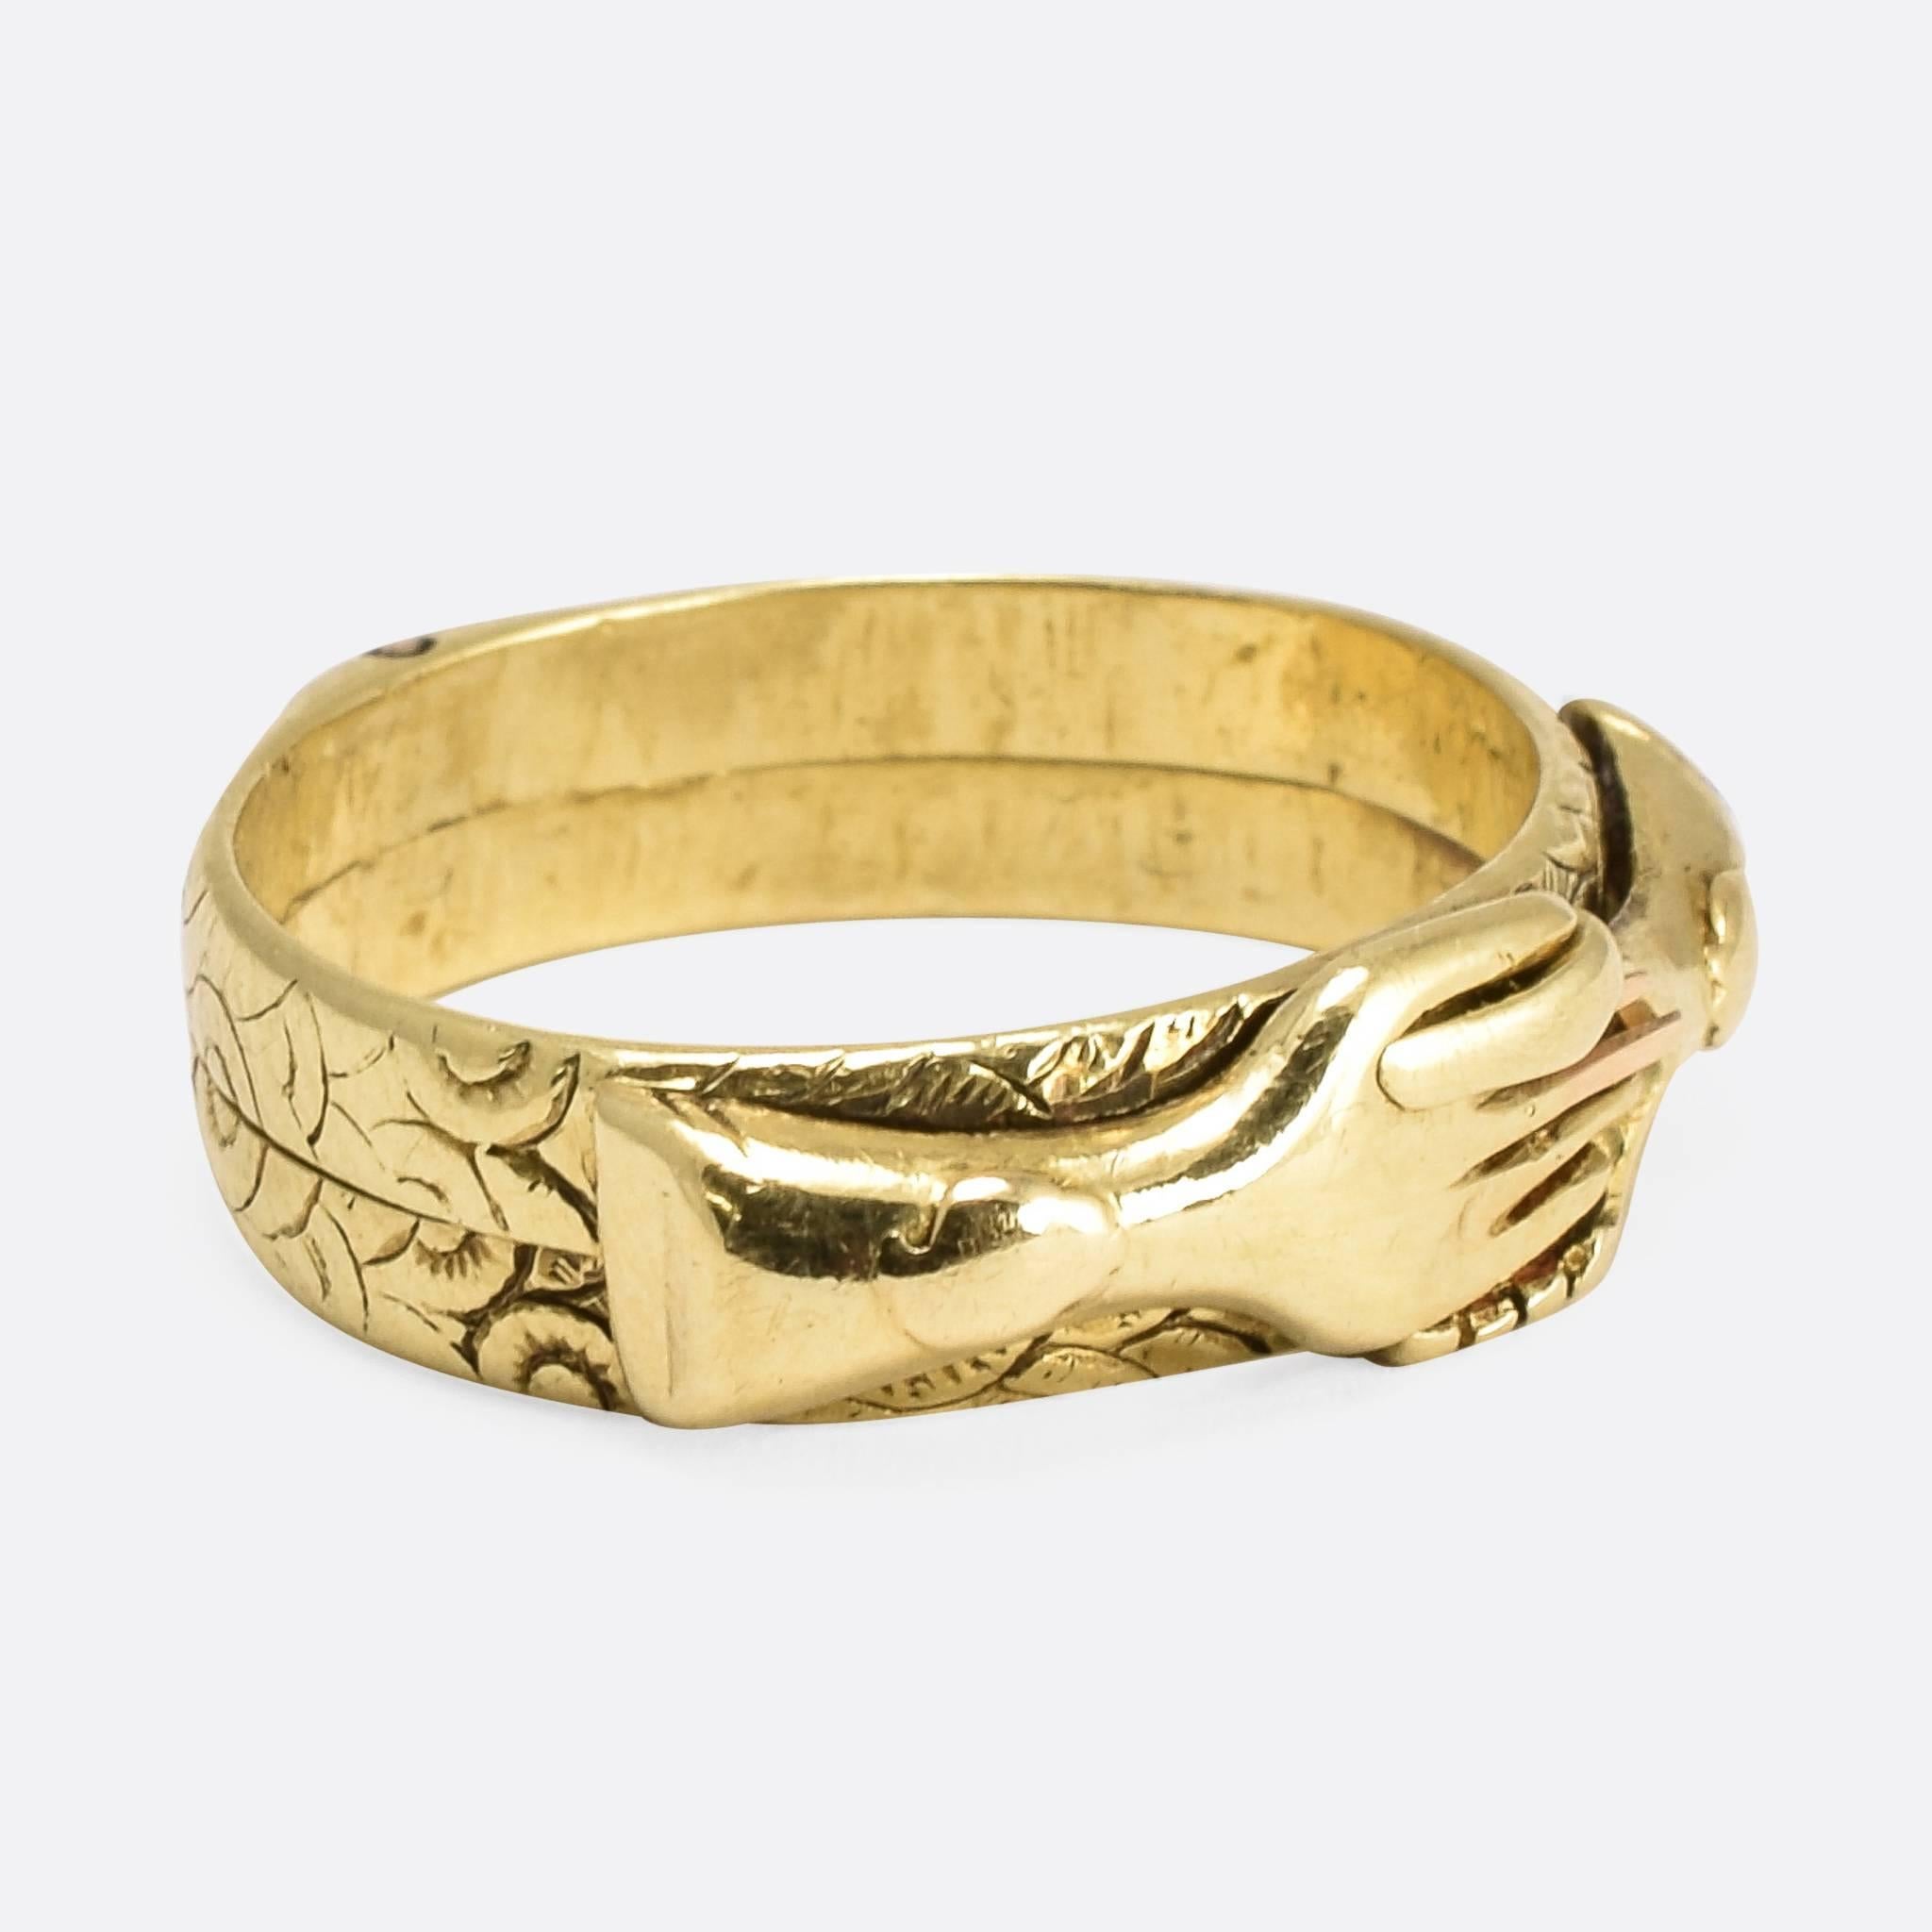 A particularly high quality early  gimmel fede handclasp ring, with two linked bands that open, allowing the hands to slide apart and back together again. The bands feature pretty hand-chased detail all around, and the piece is modelled in 15ct gold